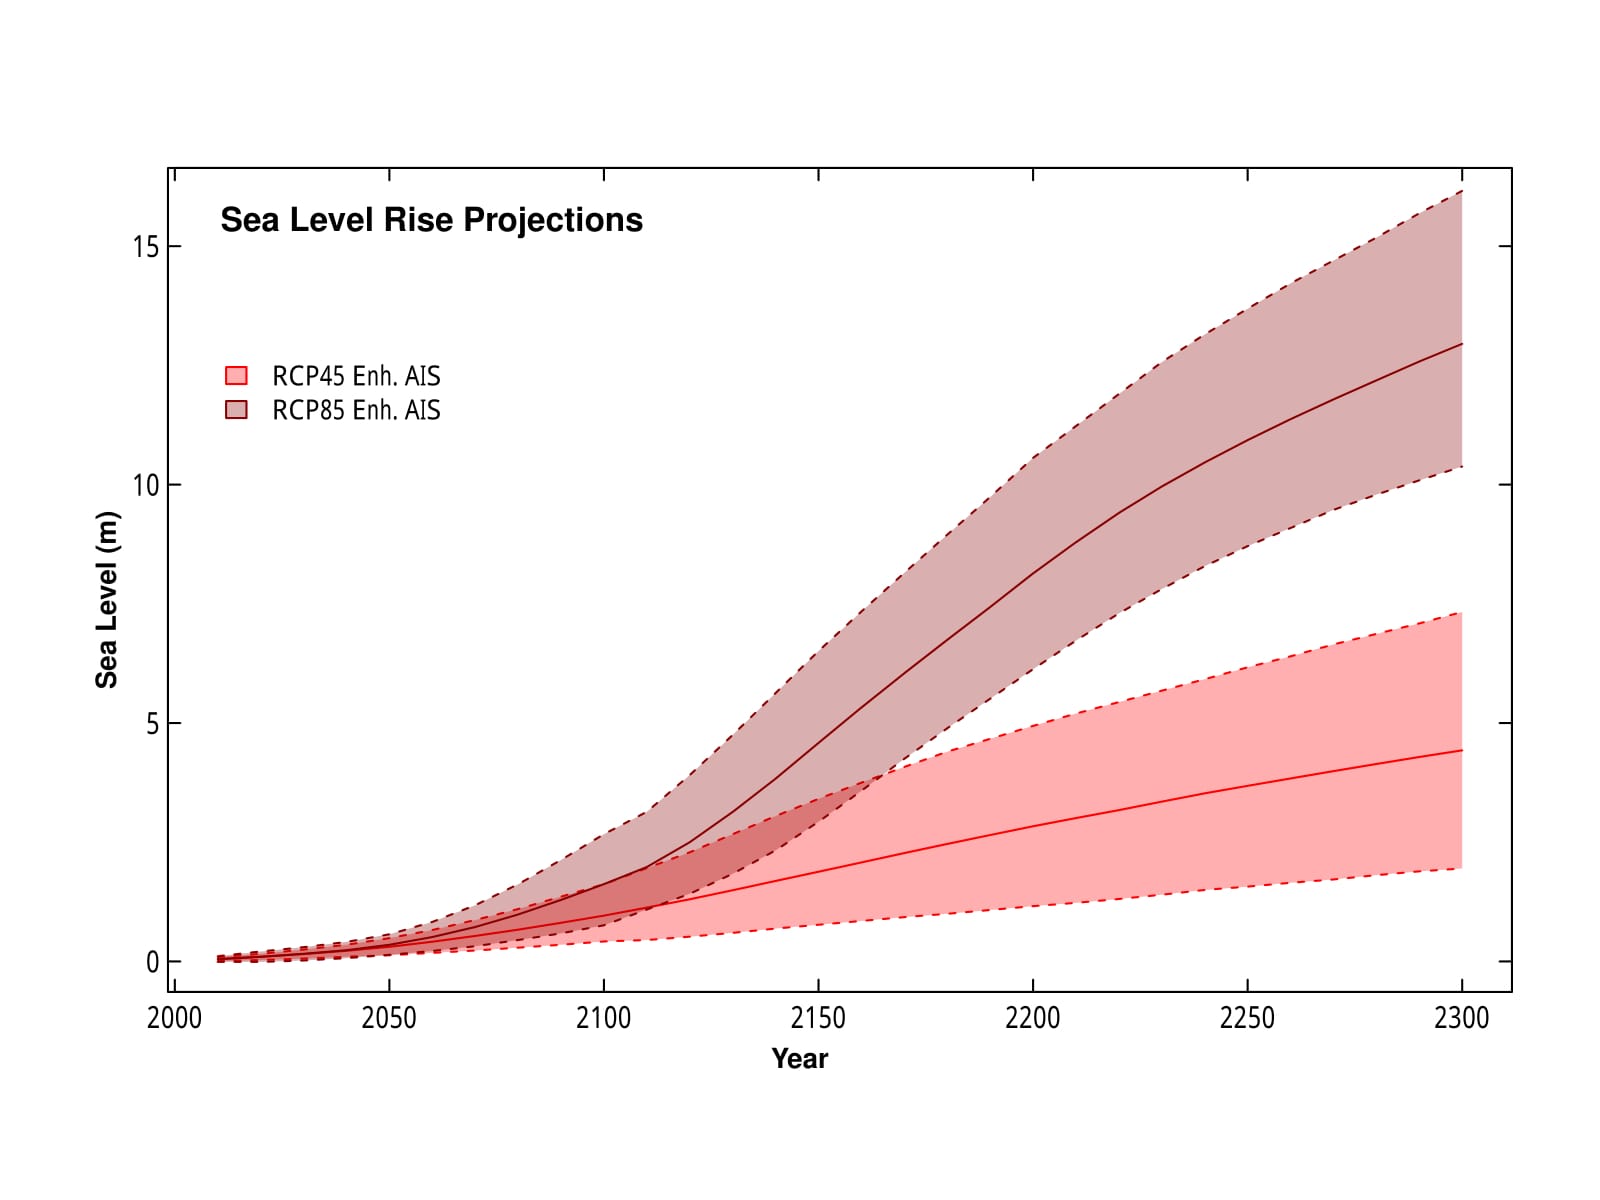 Sea level rise projections from 2000 to 2300 A.D. (Source: Andra Garner)